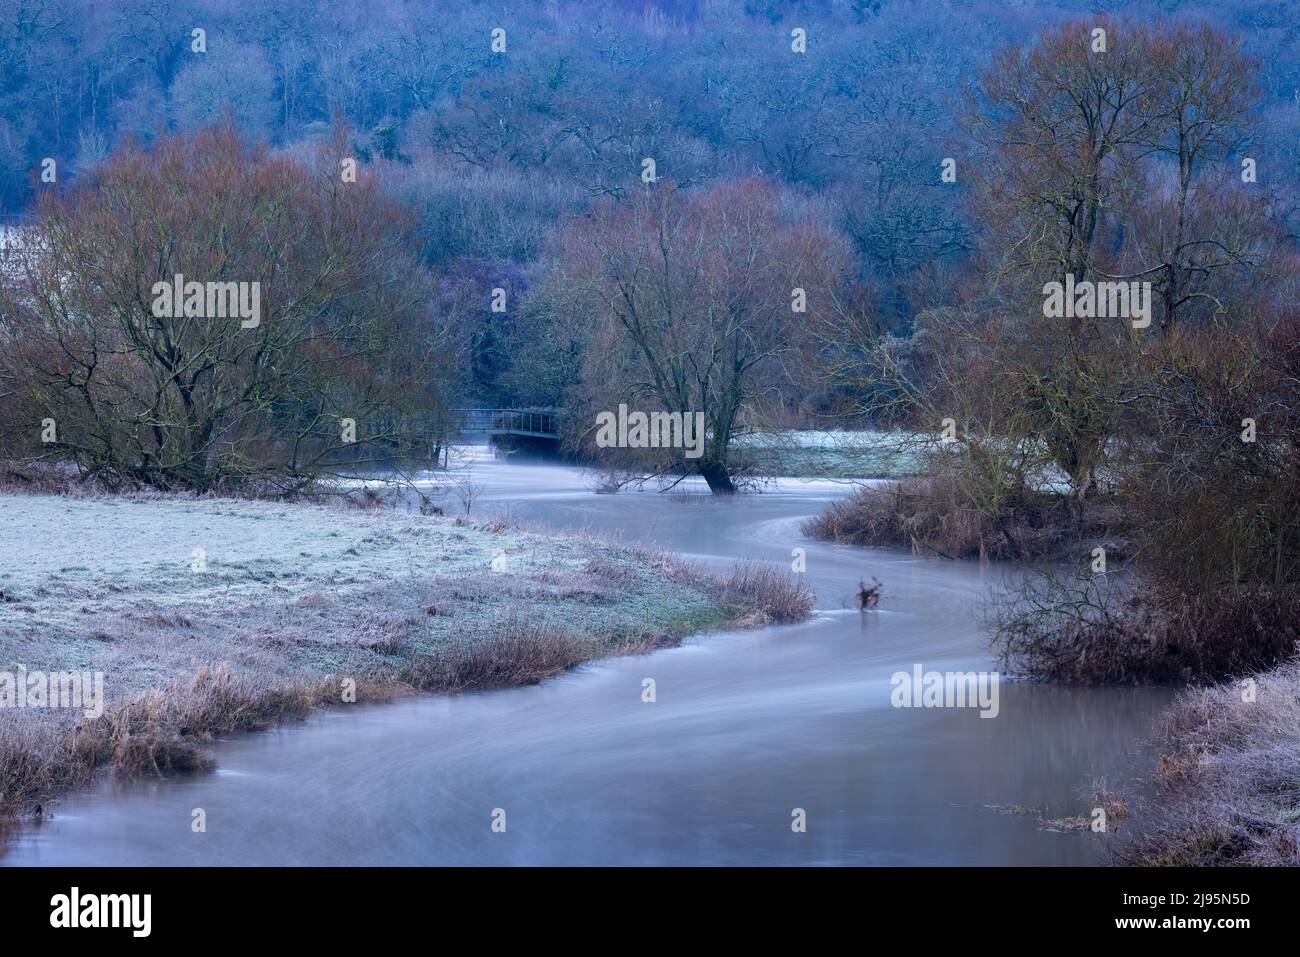 A frosty morning on the banks of the River Stour at Fiddleford, Dorset, England, UK Stock Photo